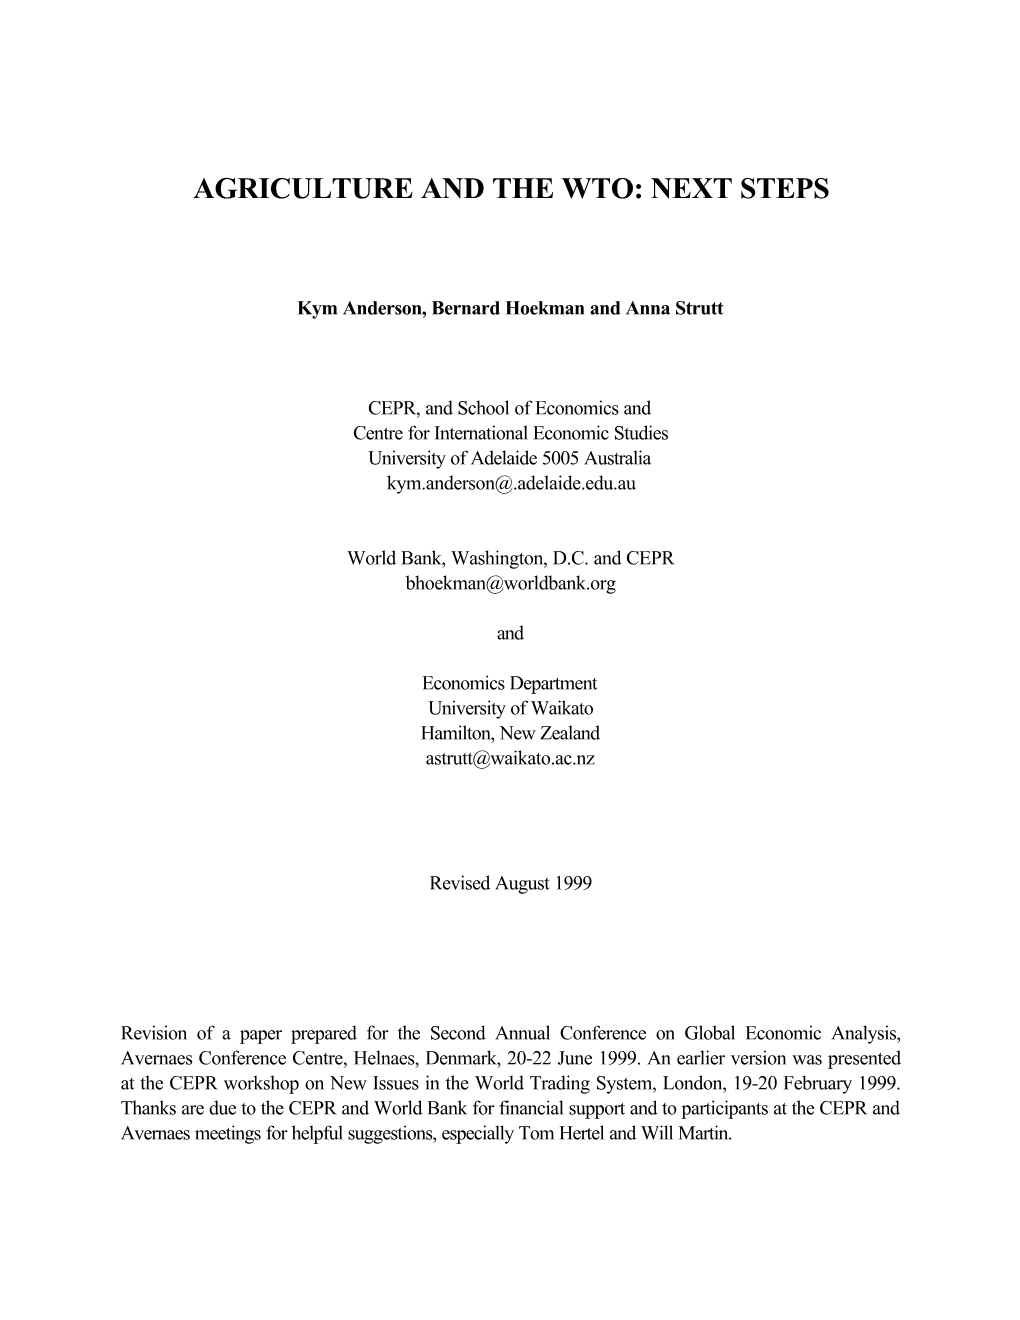 Agriculture and the Wto: Next Steps